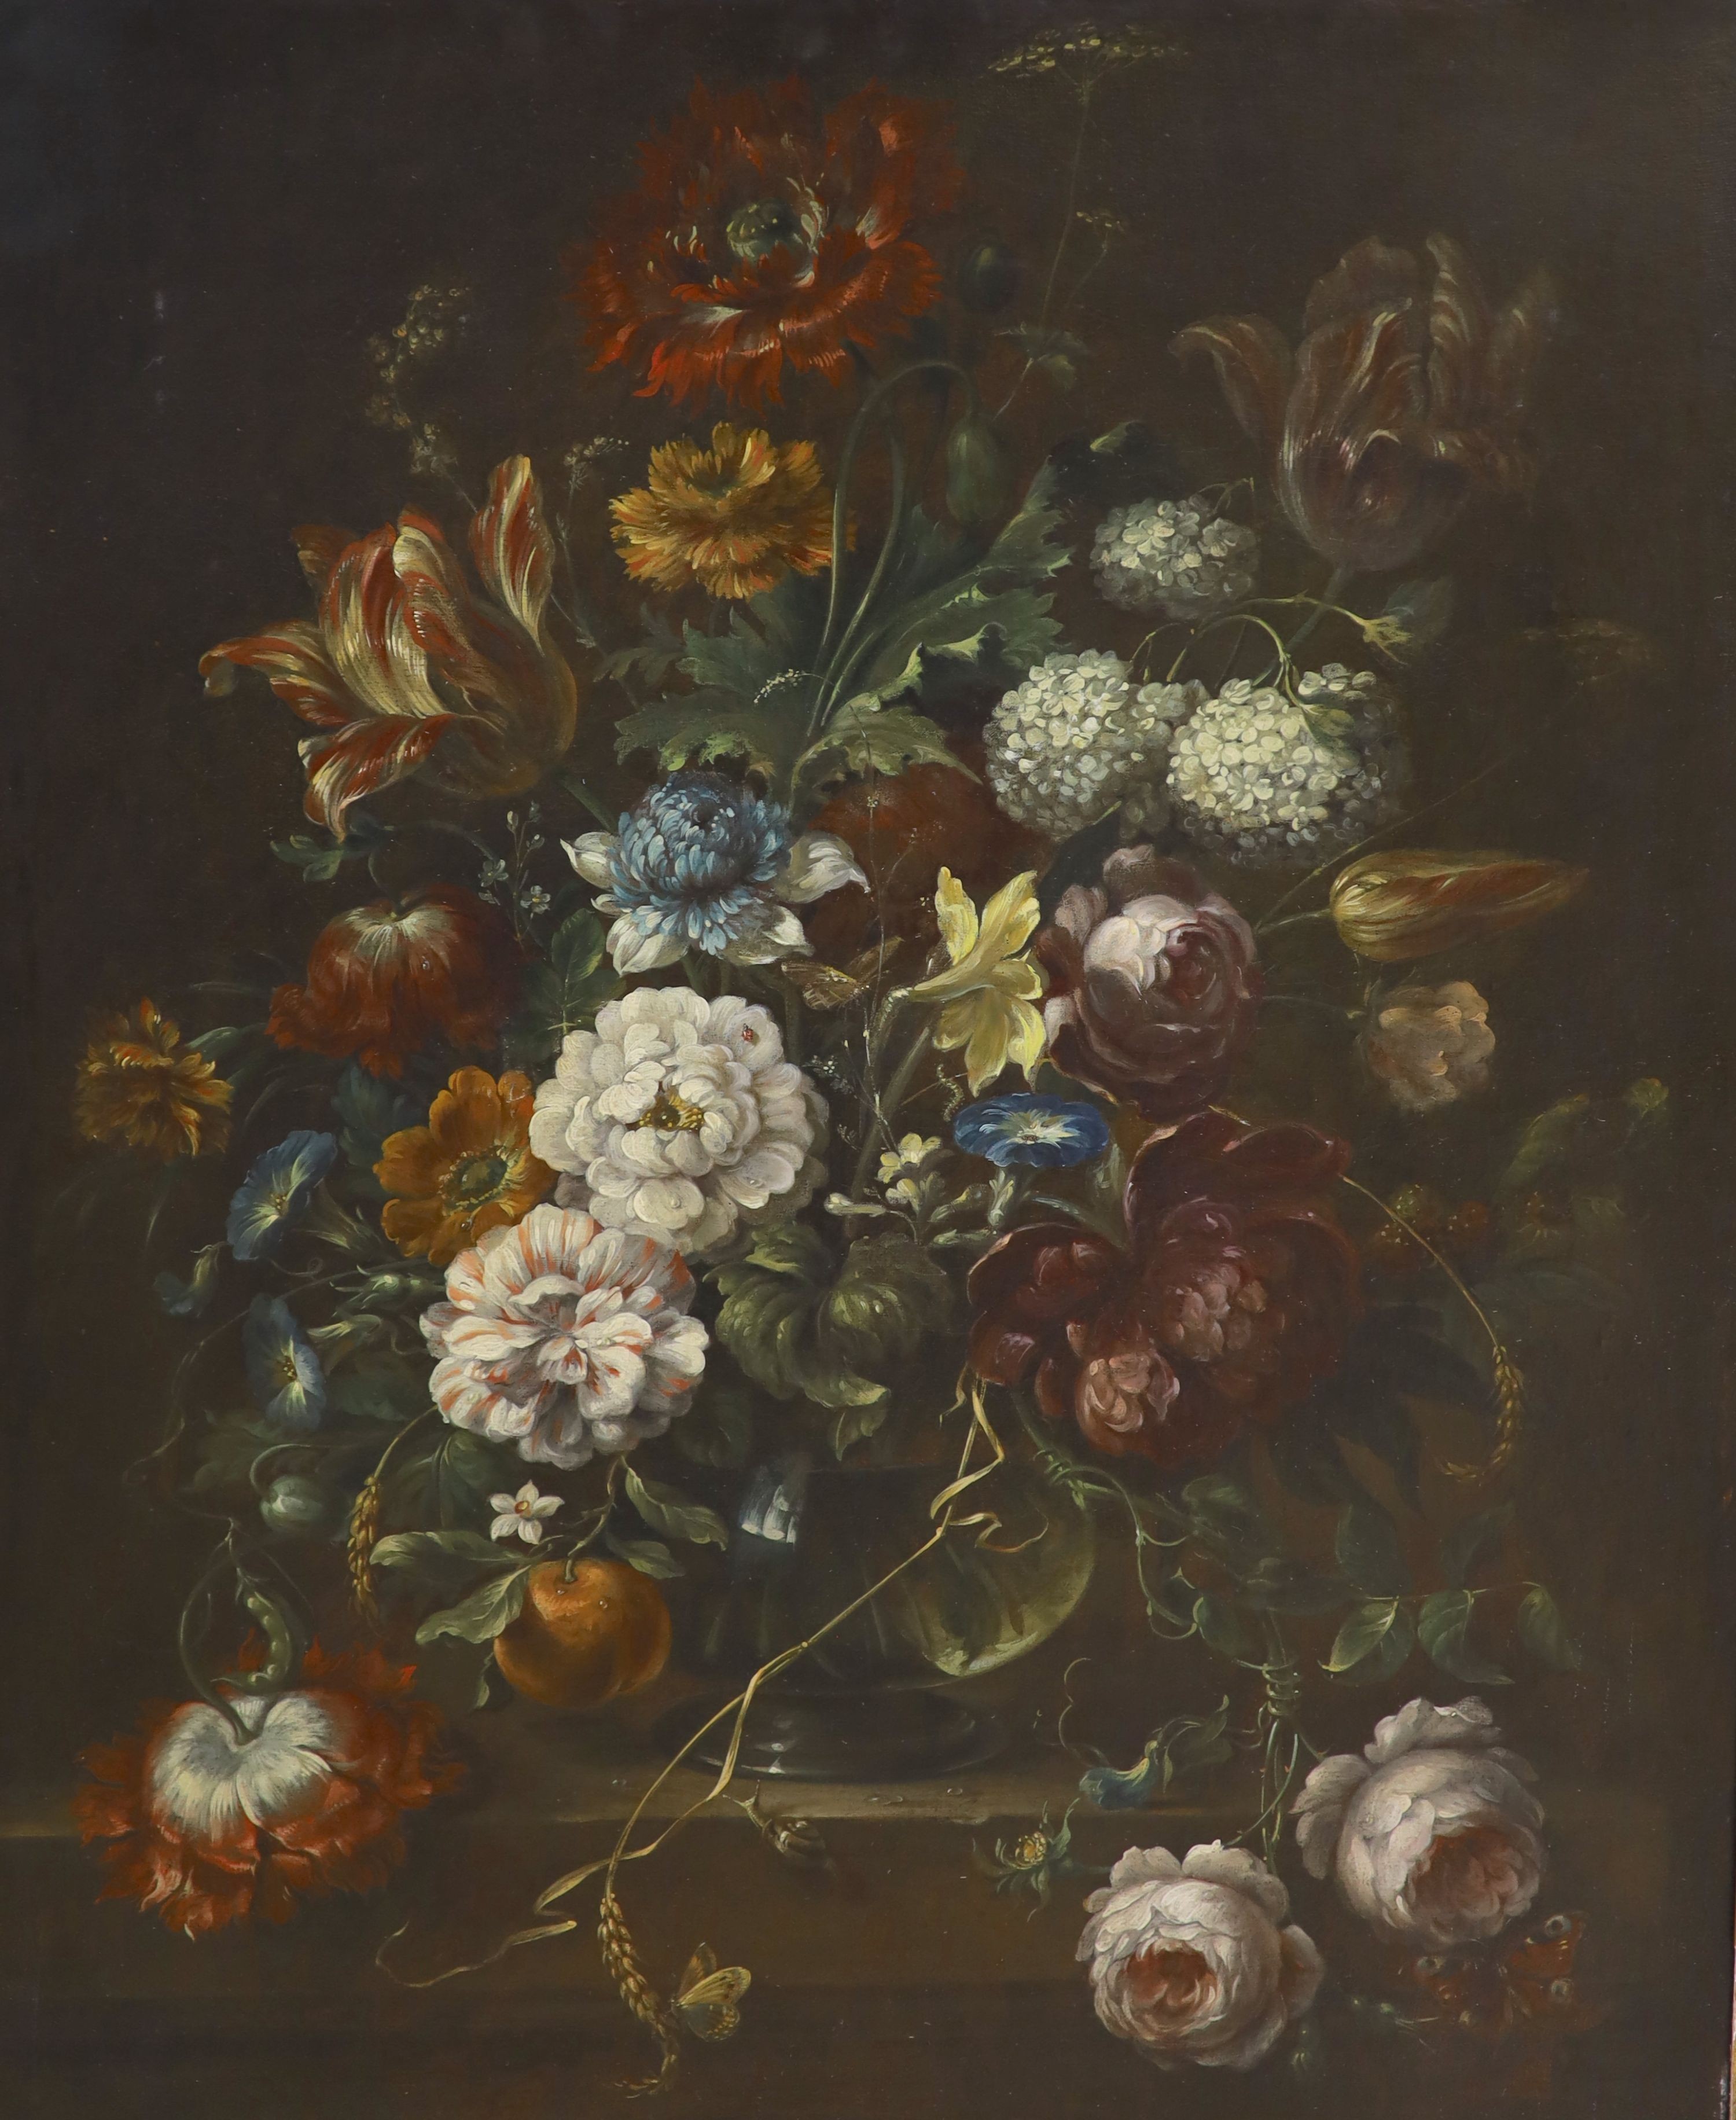 18th century Dutch School. Still life of flowers in a glass vase, oil on canvas, 28.75